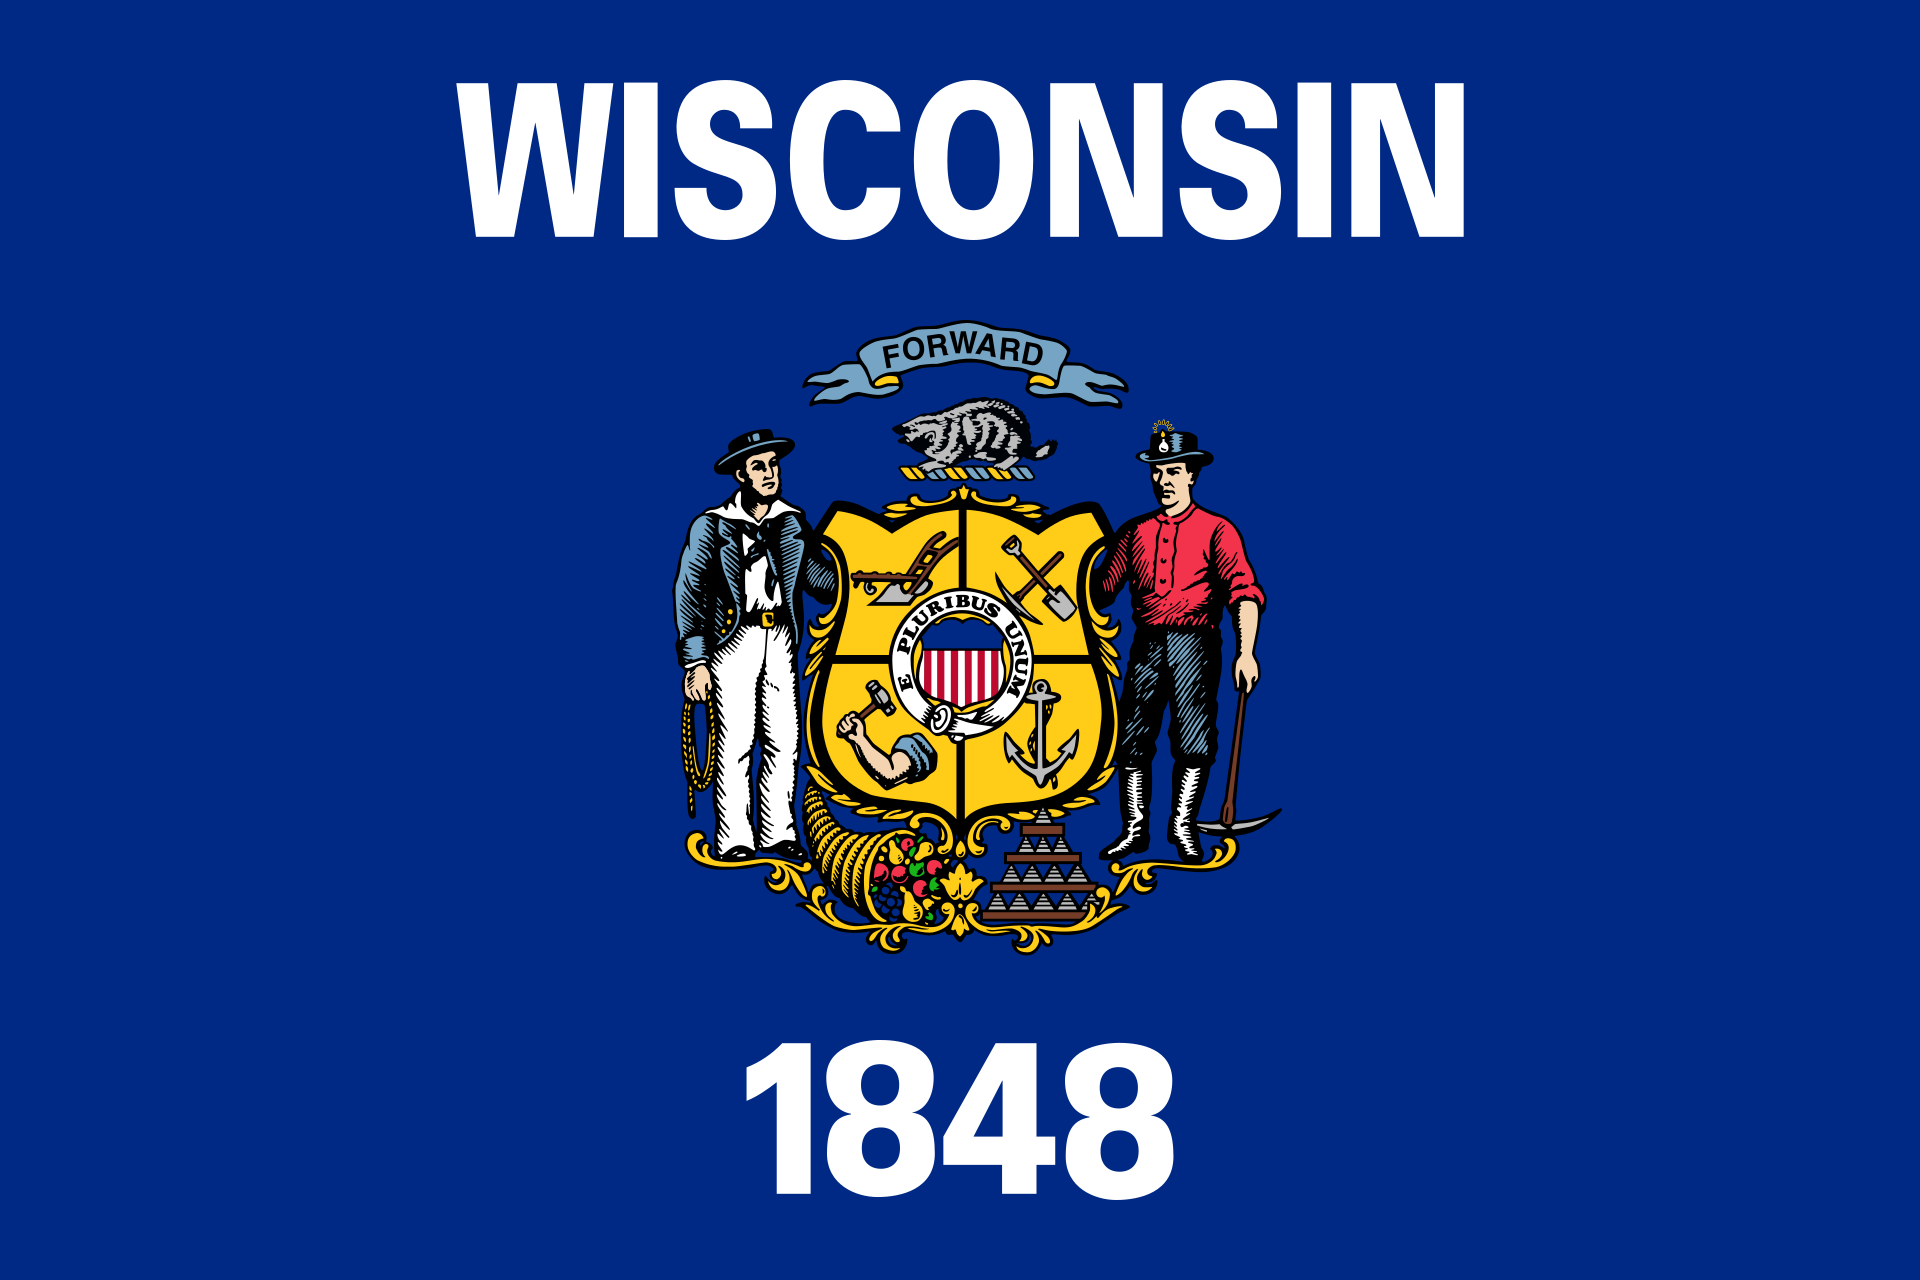 flag for the state of Wisconsin, established 1848